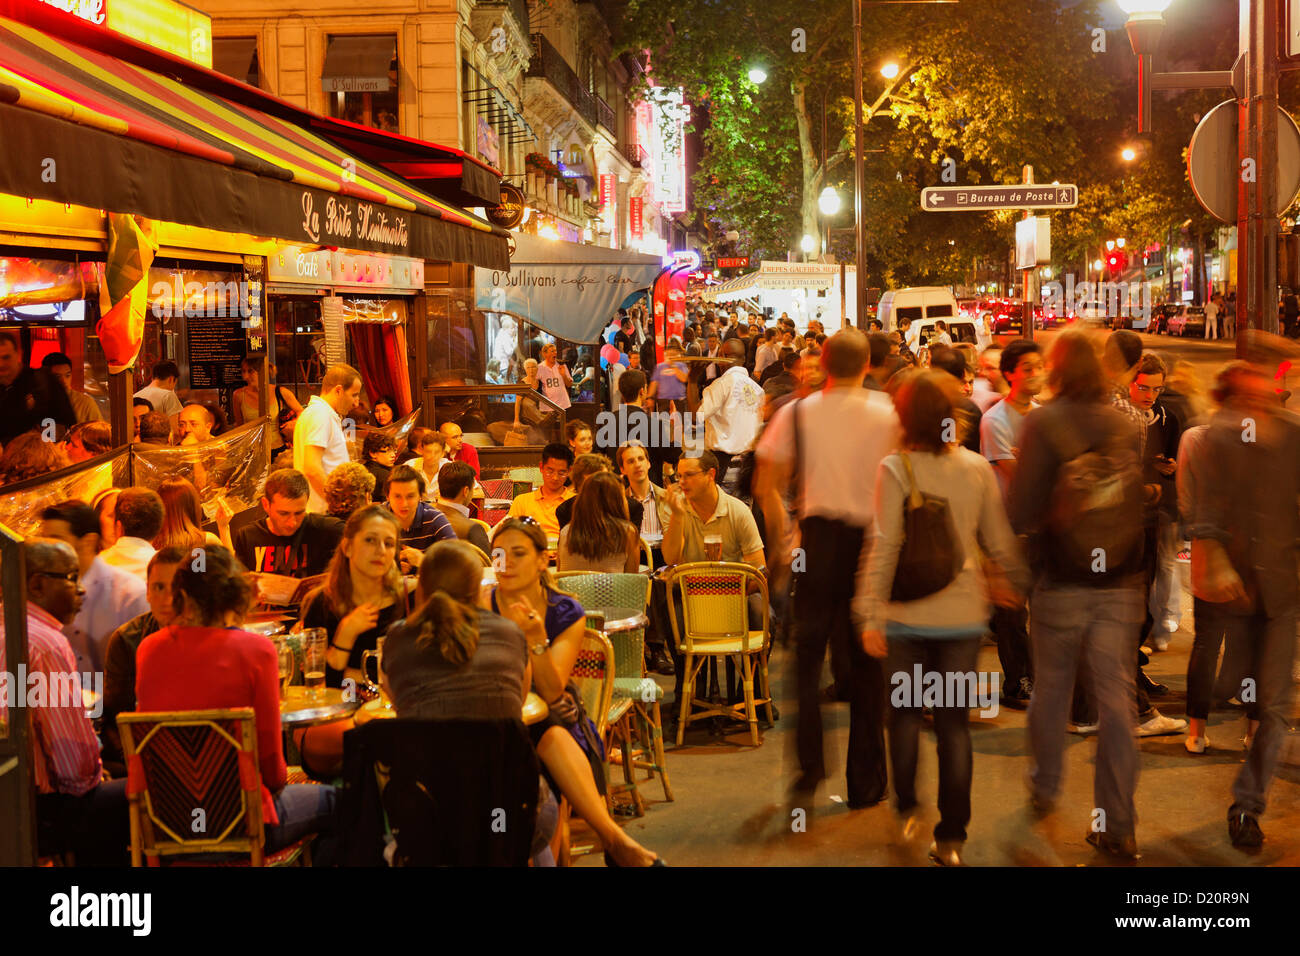 People in the street and in restaurants in the evening, La Porte Montmartre, Boulevard Montmartre, Paris, France, Europe Stock Photo